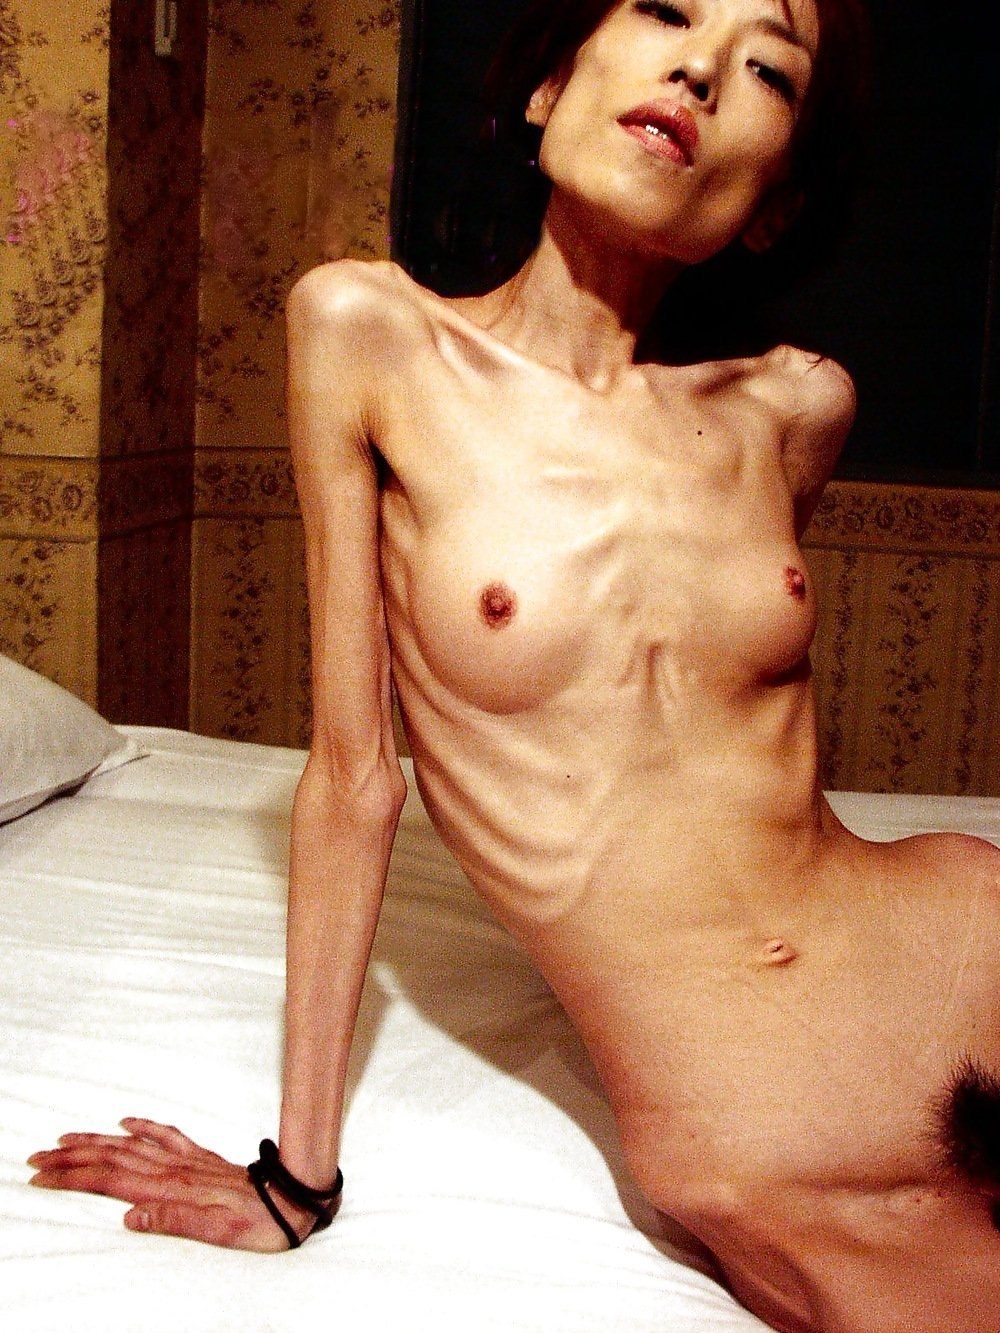 Sex with Anorexic Girl (82 photos) image